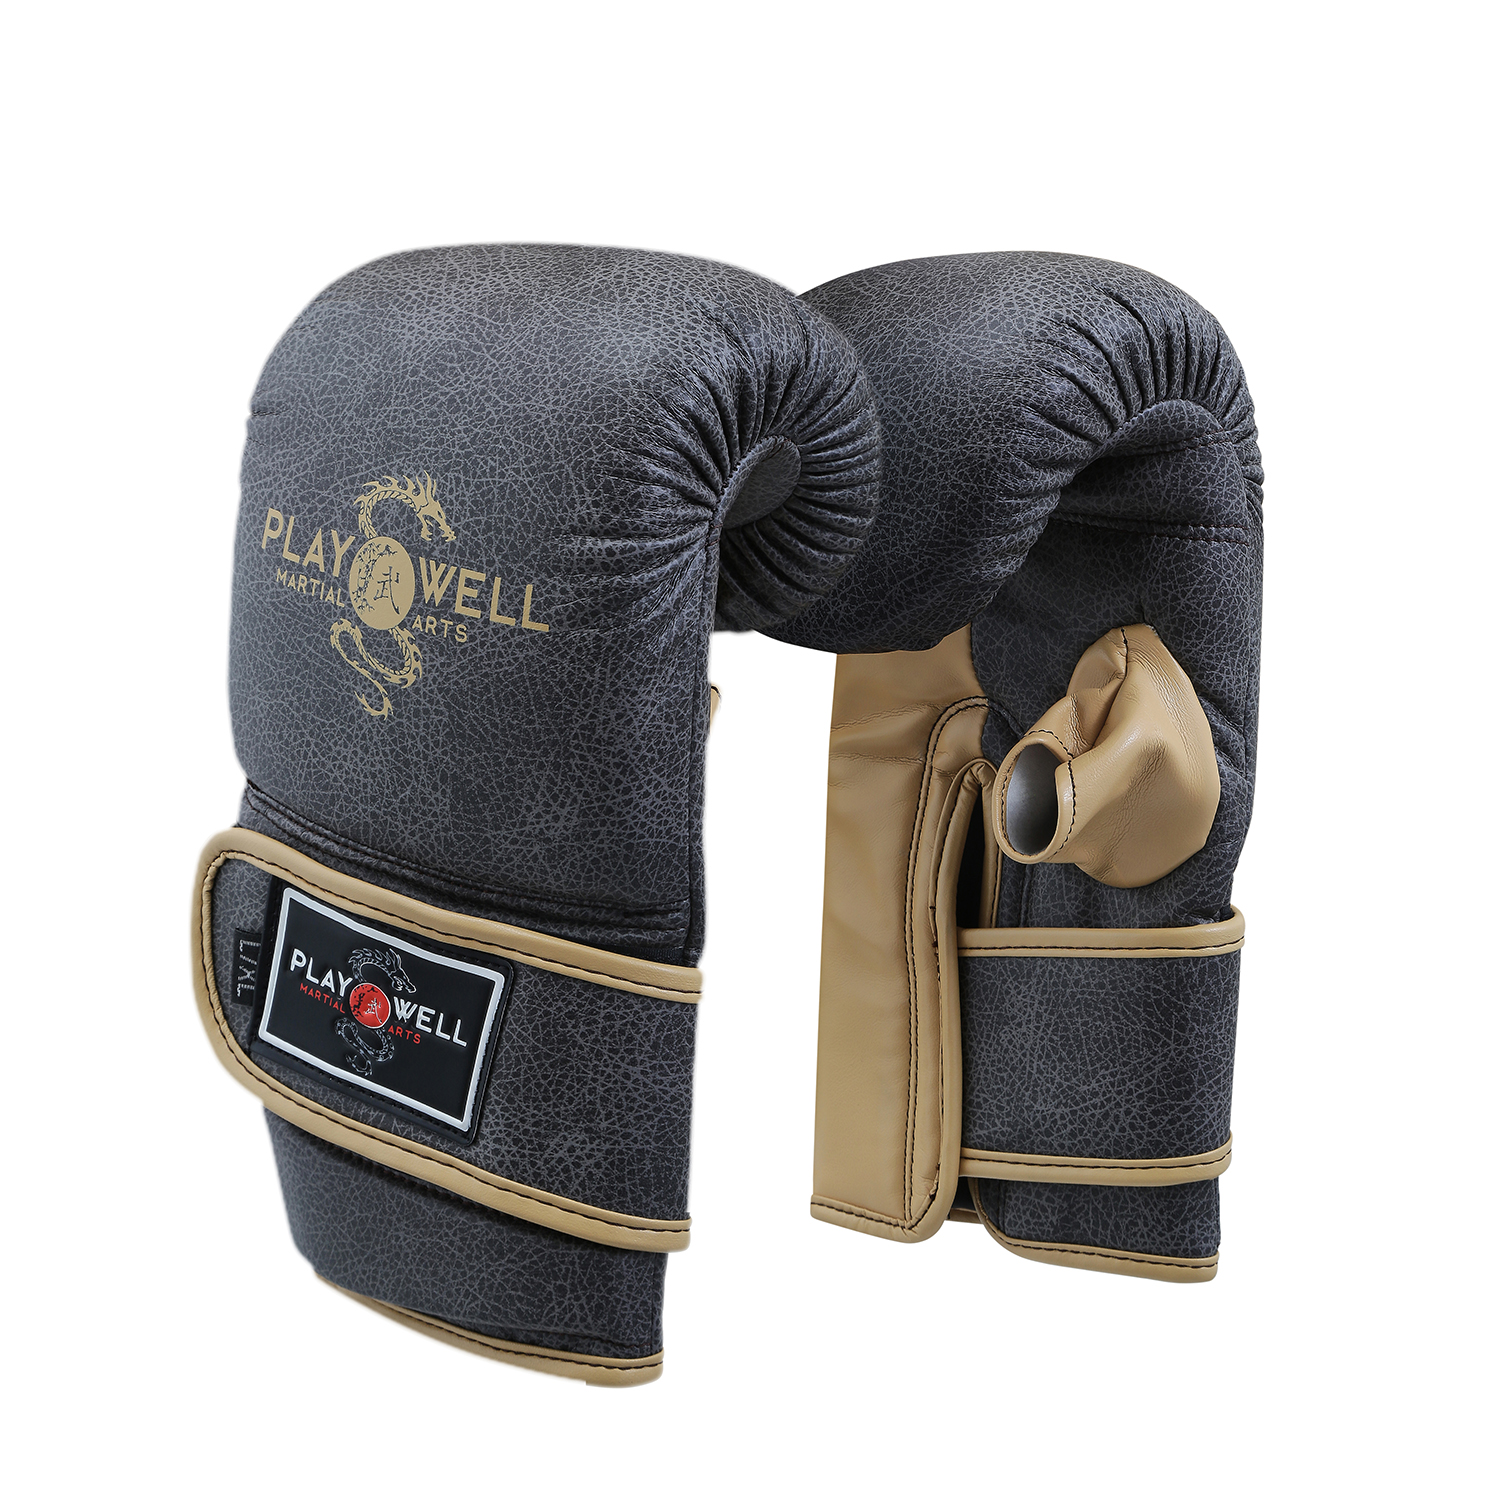 Playwell MMA "Vintage Series" Punching Bag Mitt Gloves - Click Image to Close